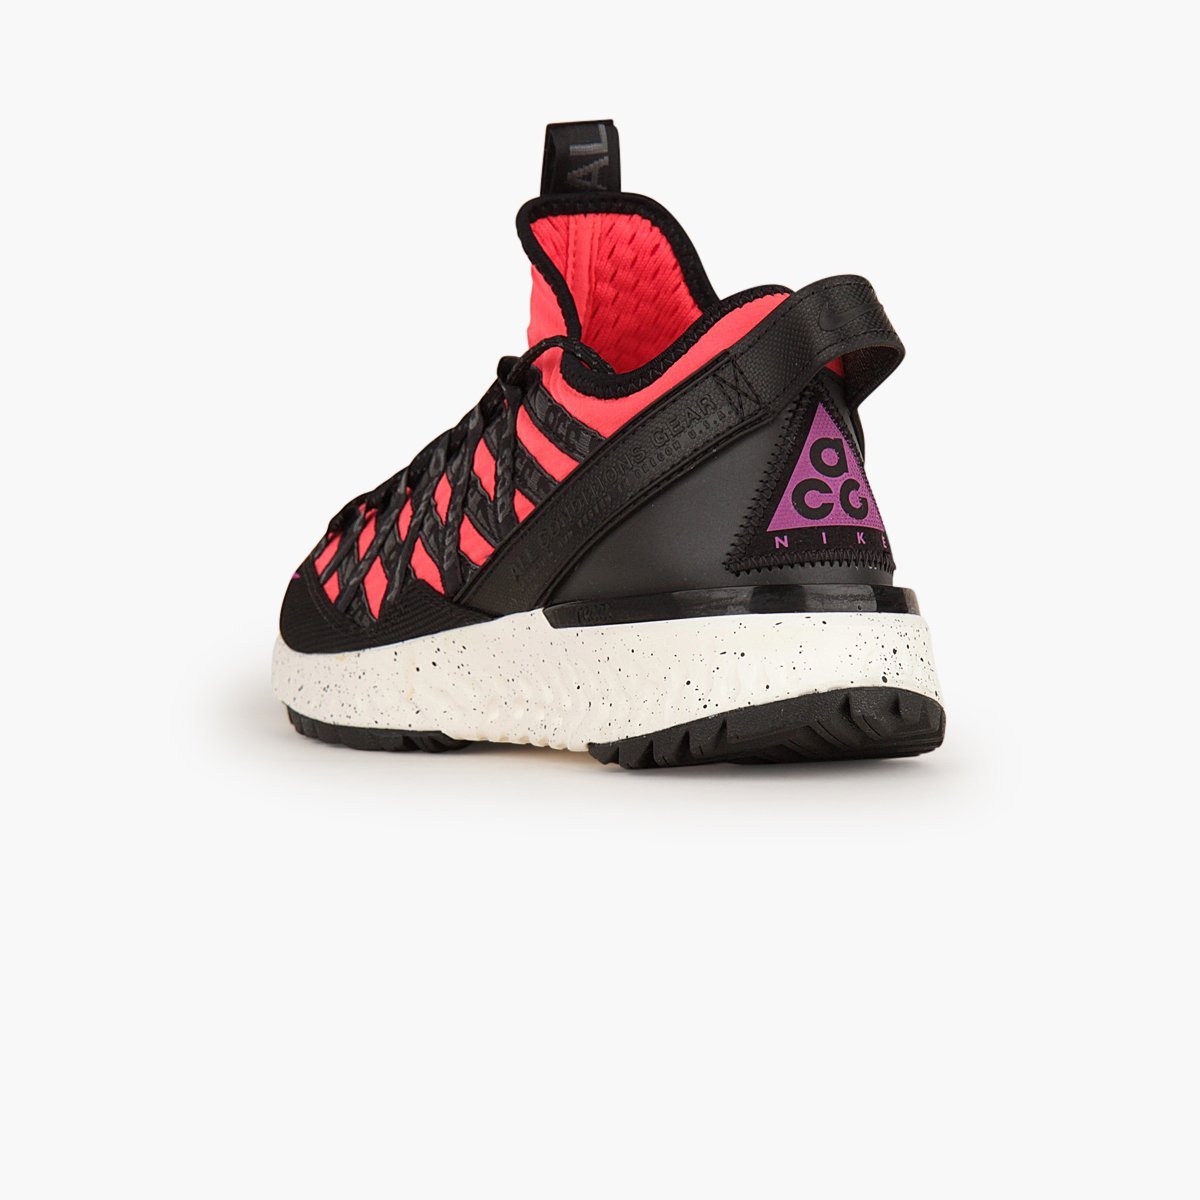 Nike ACG REACT TERRA now at Store – Store